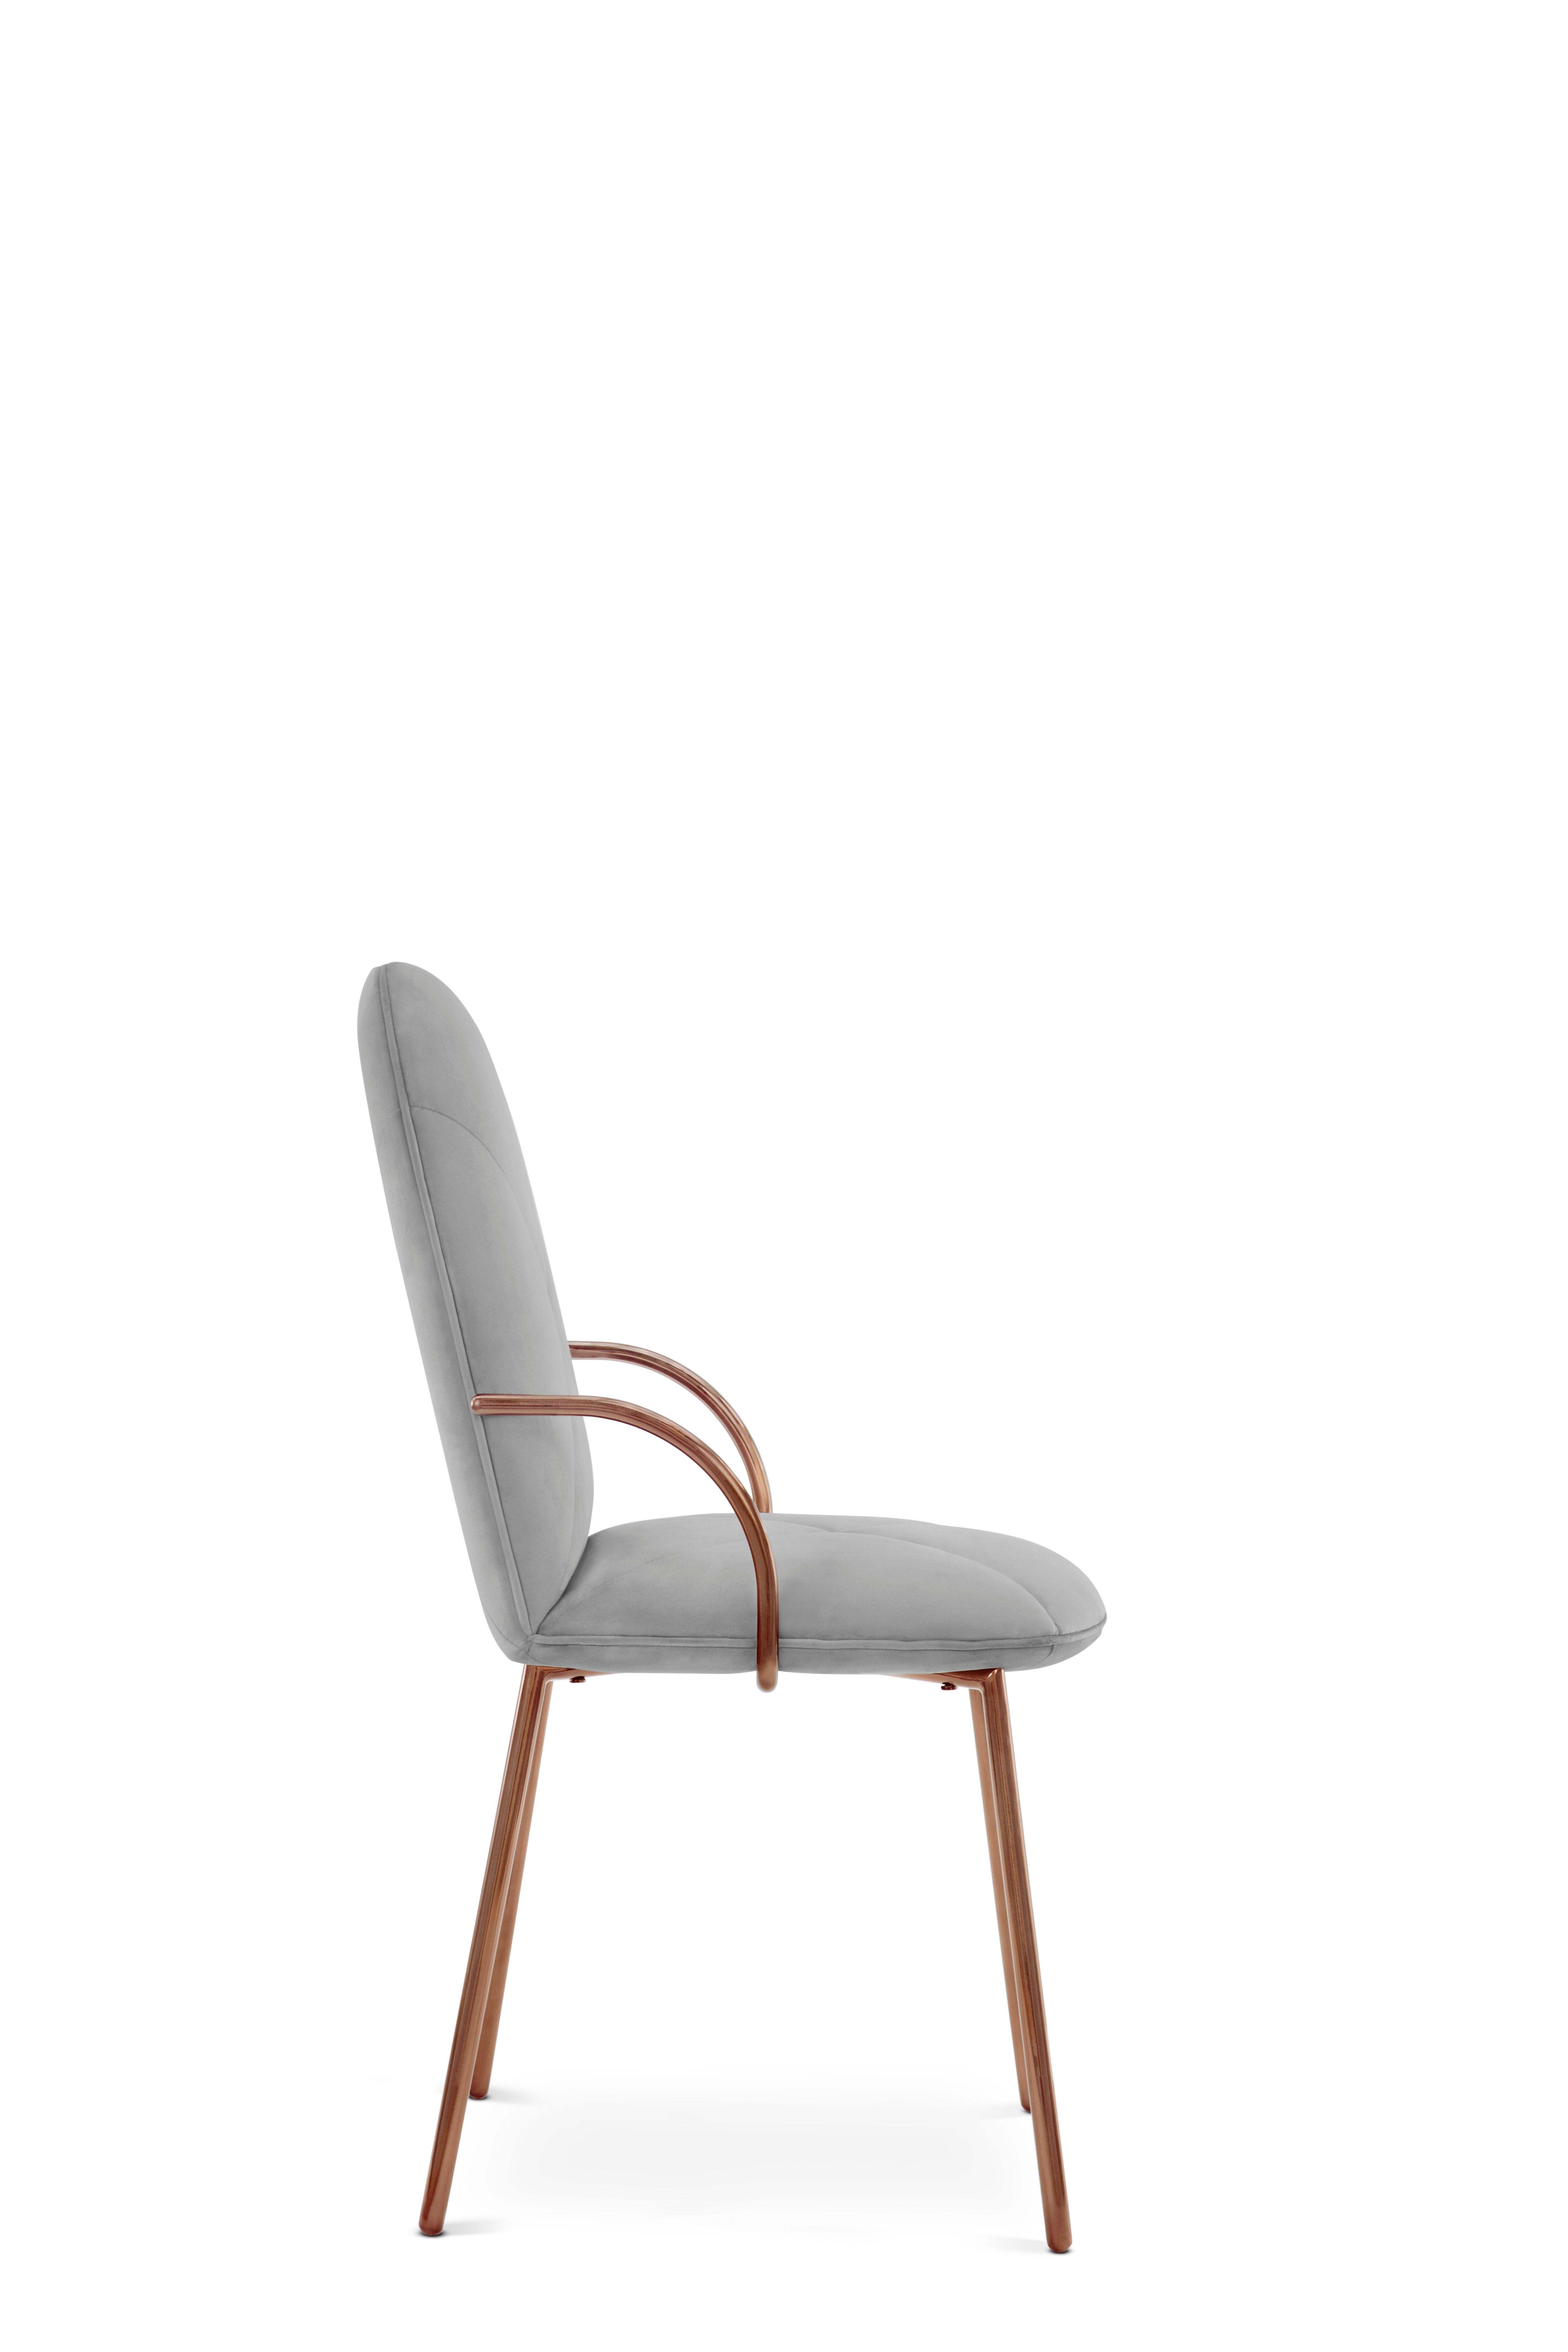 Modern Orion Dining Chair with Plush Gray Velvet and Rose Gold Arms by Nika Zupanc For Sale